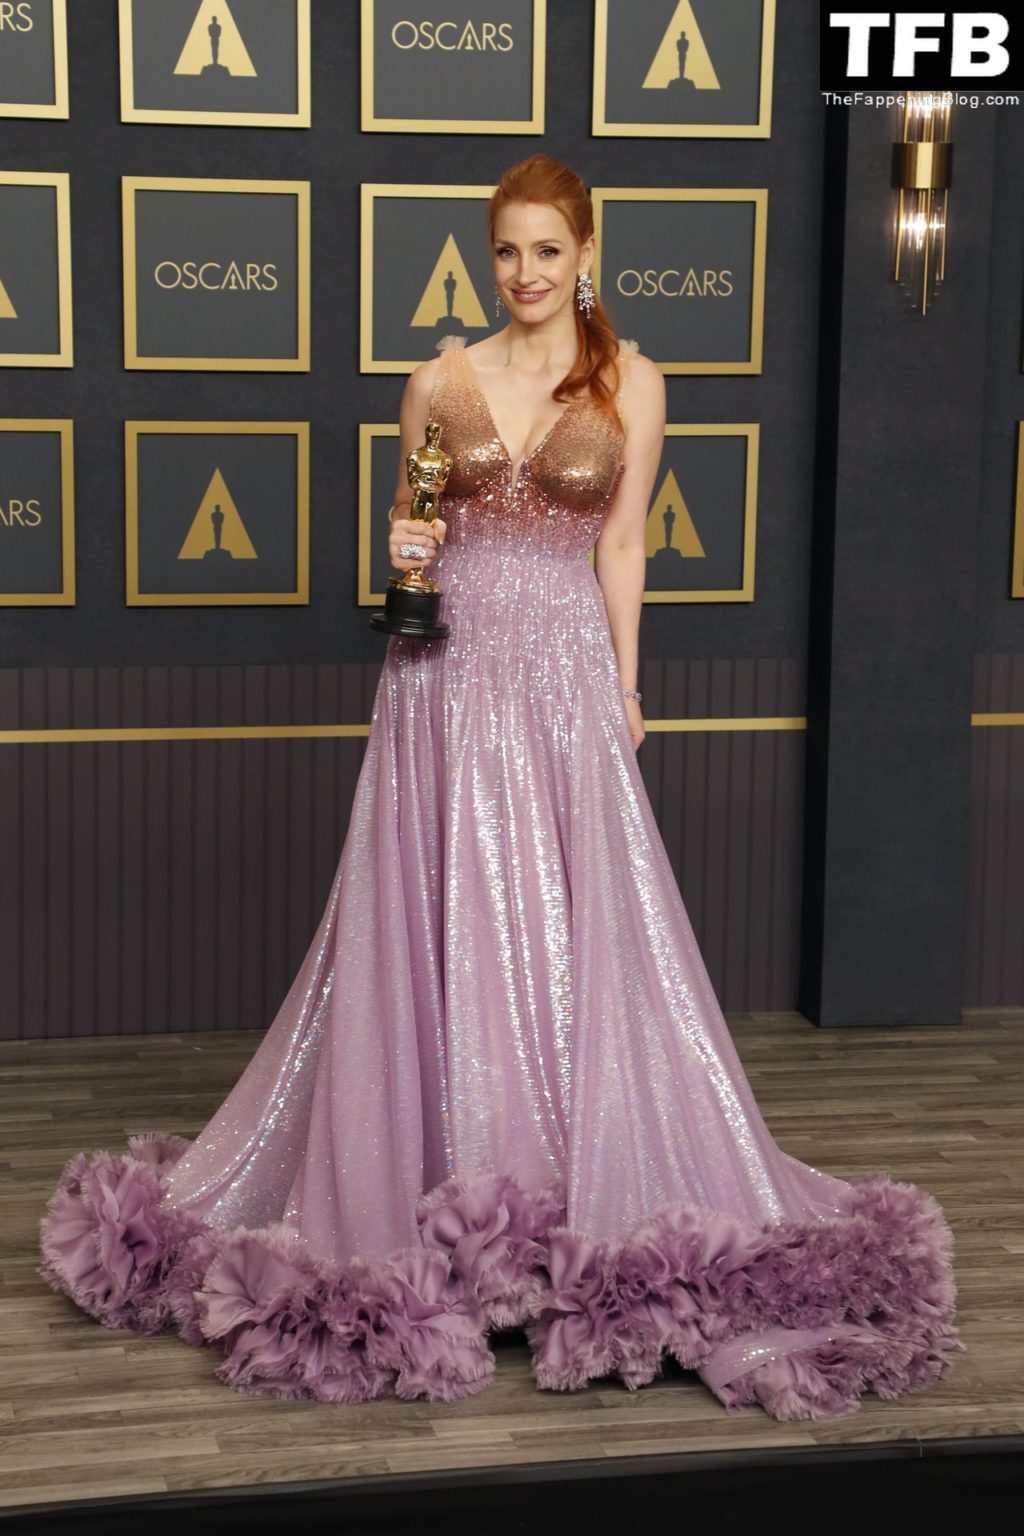 Jessica Chastain Sexy The Fappening Blog 18 2 1024x1536 - Jessica Chastain Poses With Her Oscar at the 94th Academy Awards (150 Photos)